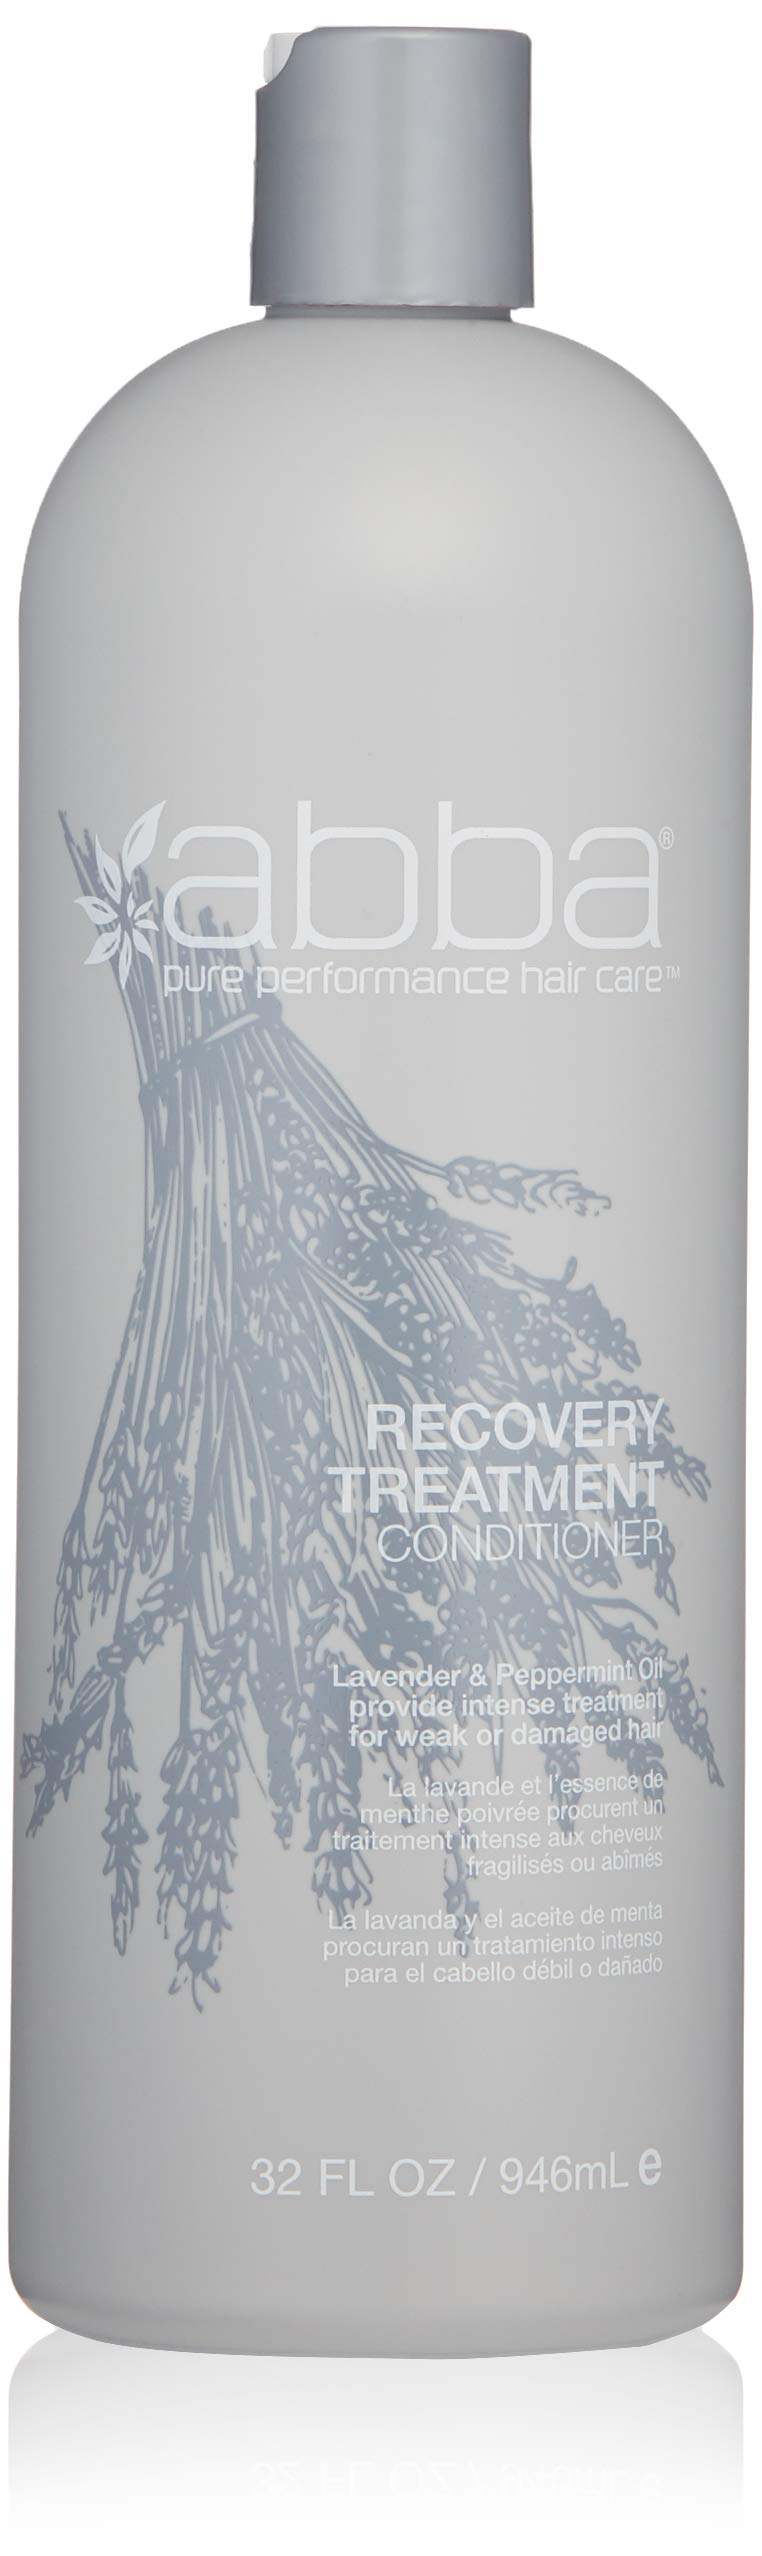 ABBA Recovery Treatment Conditioner, Lavender & Peppermint Oil